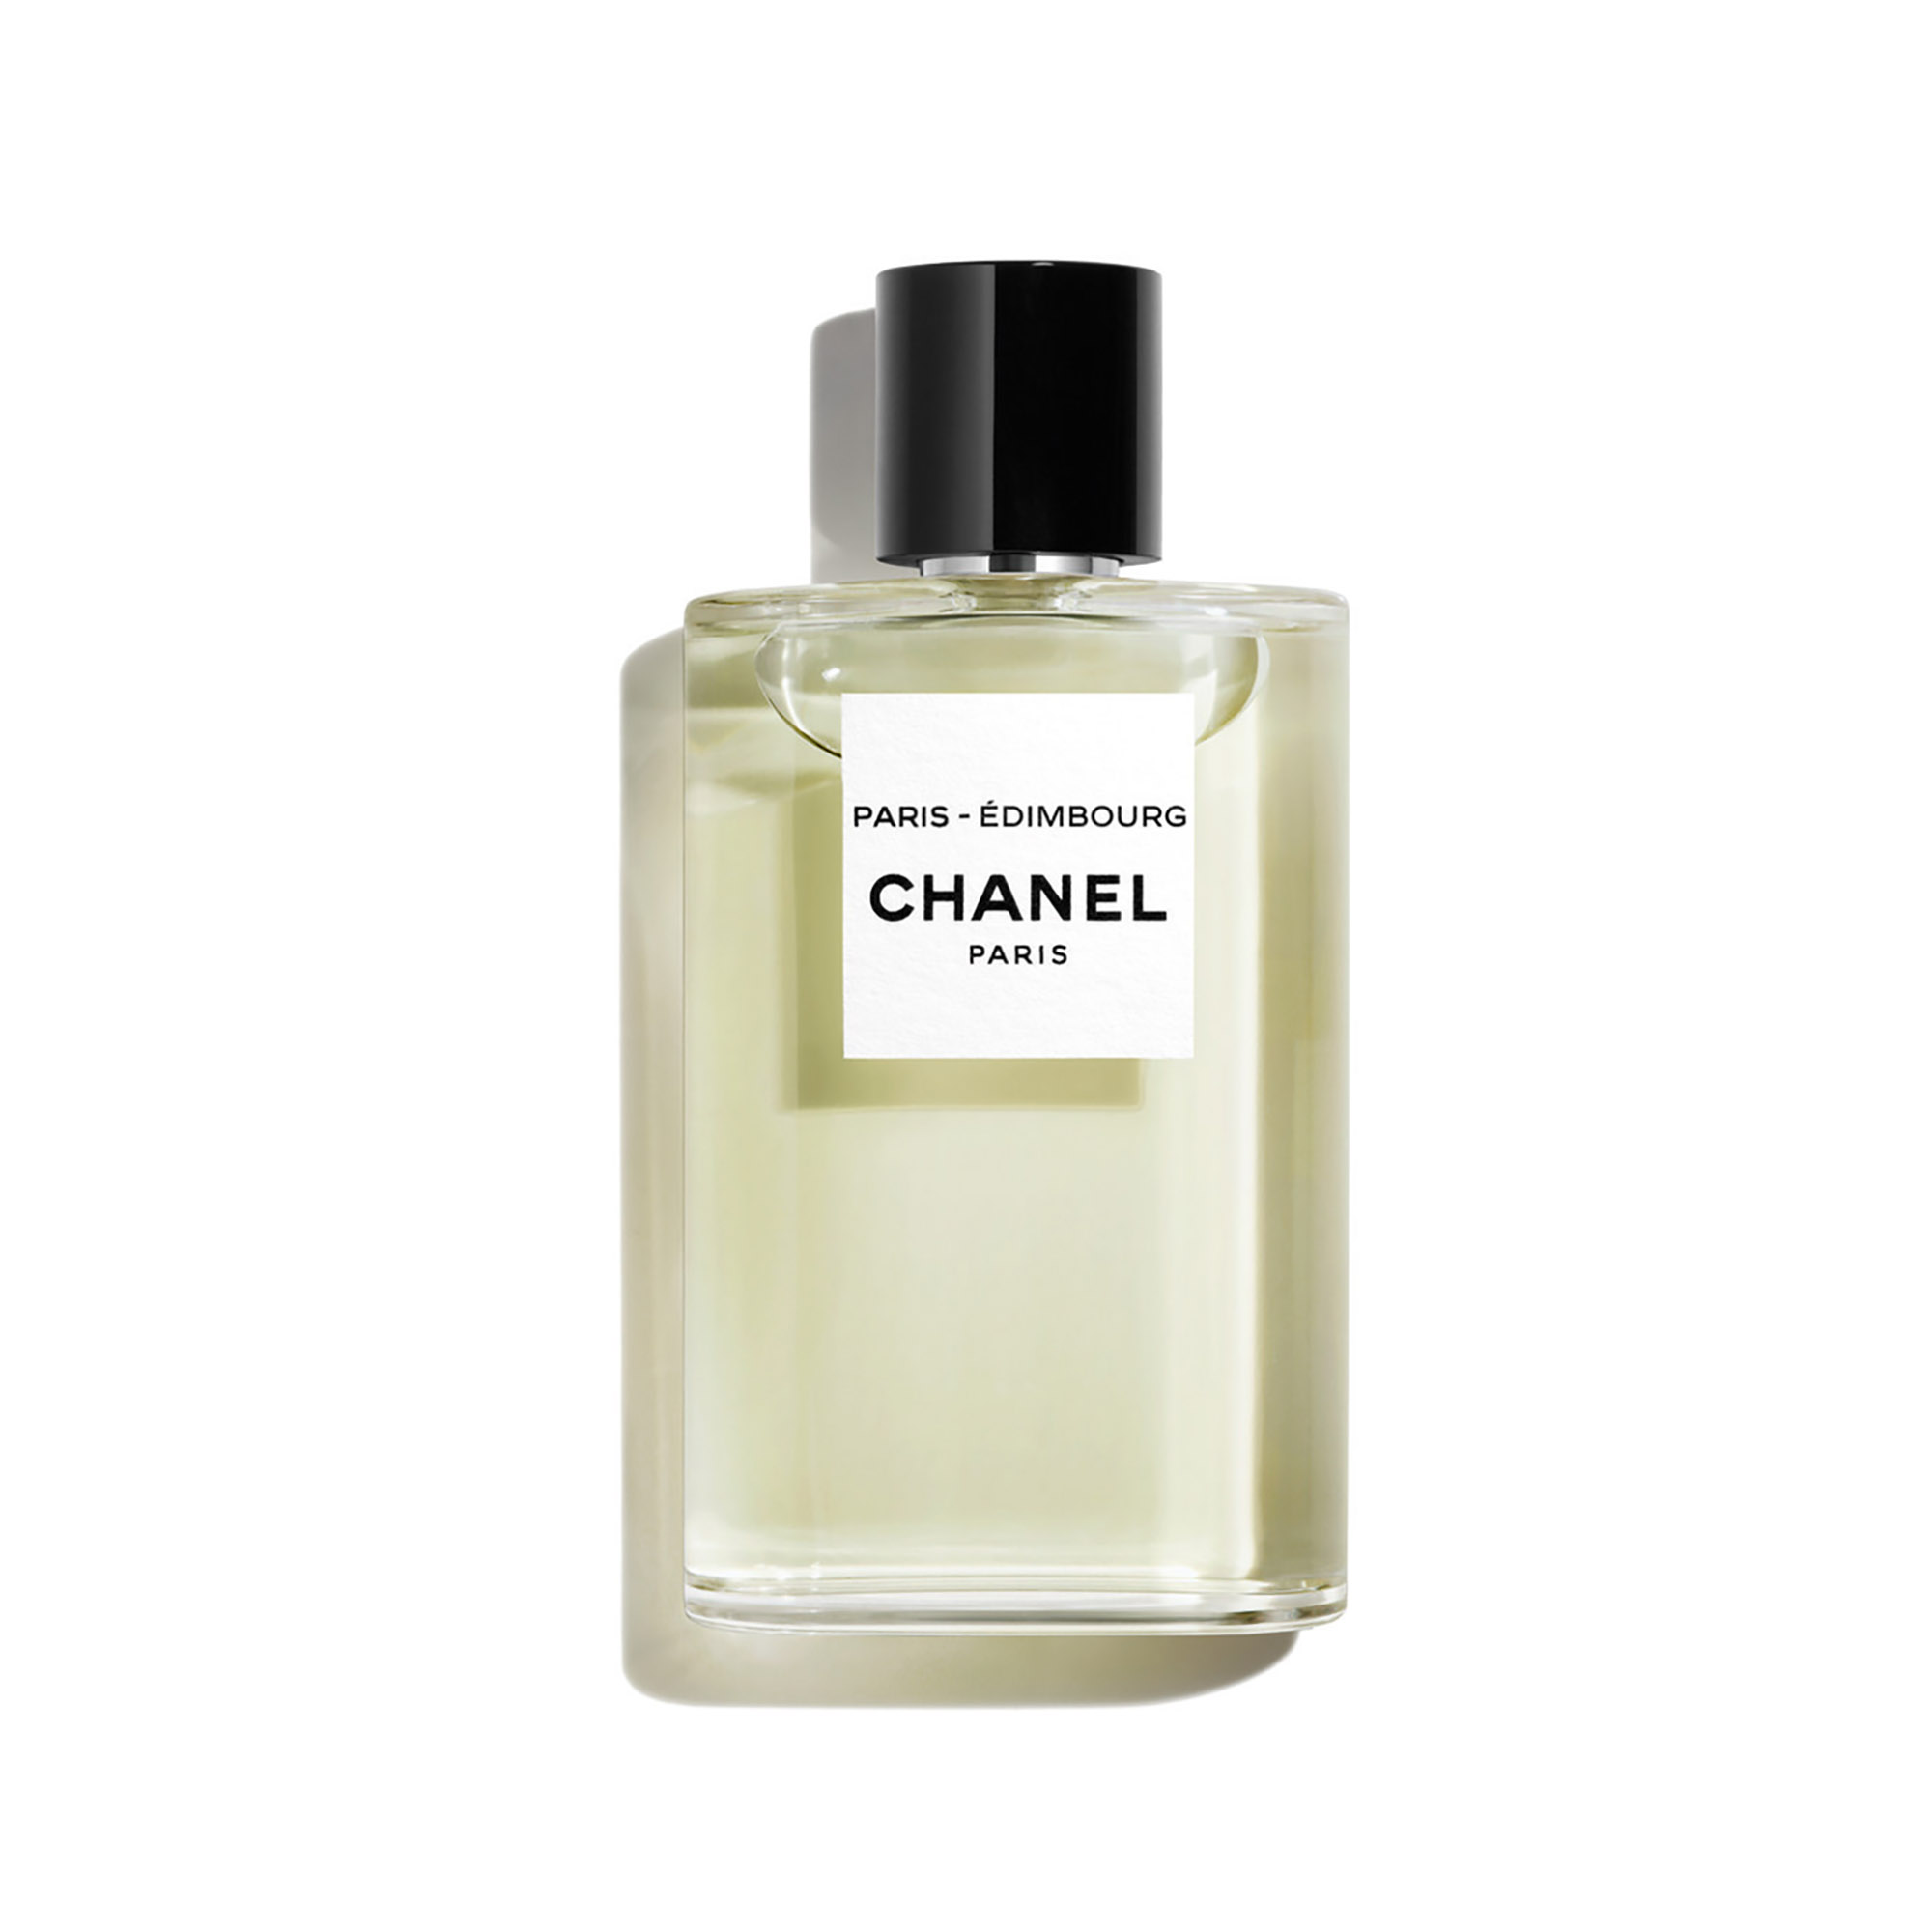 How Chanel's Perfected Sustainable Perfume Cap Took 48 Tries - Bloomberg